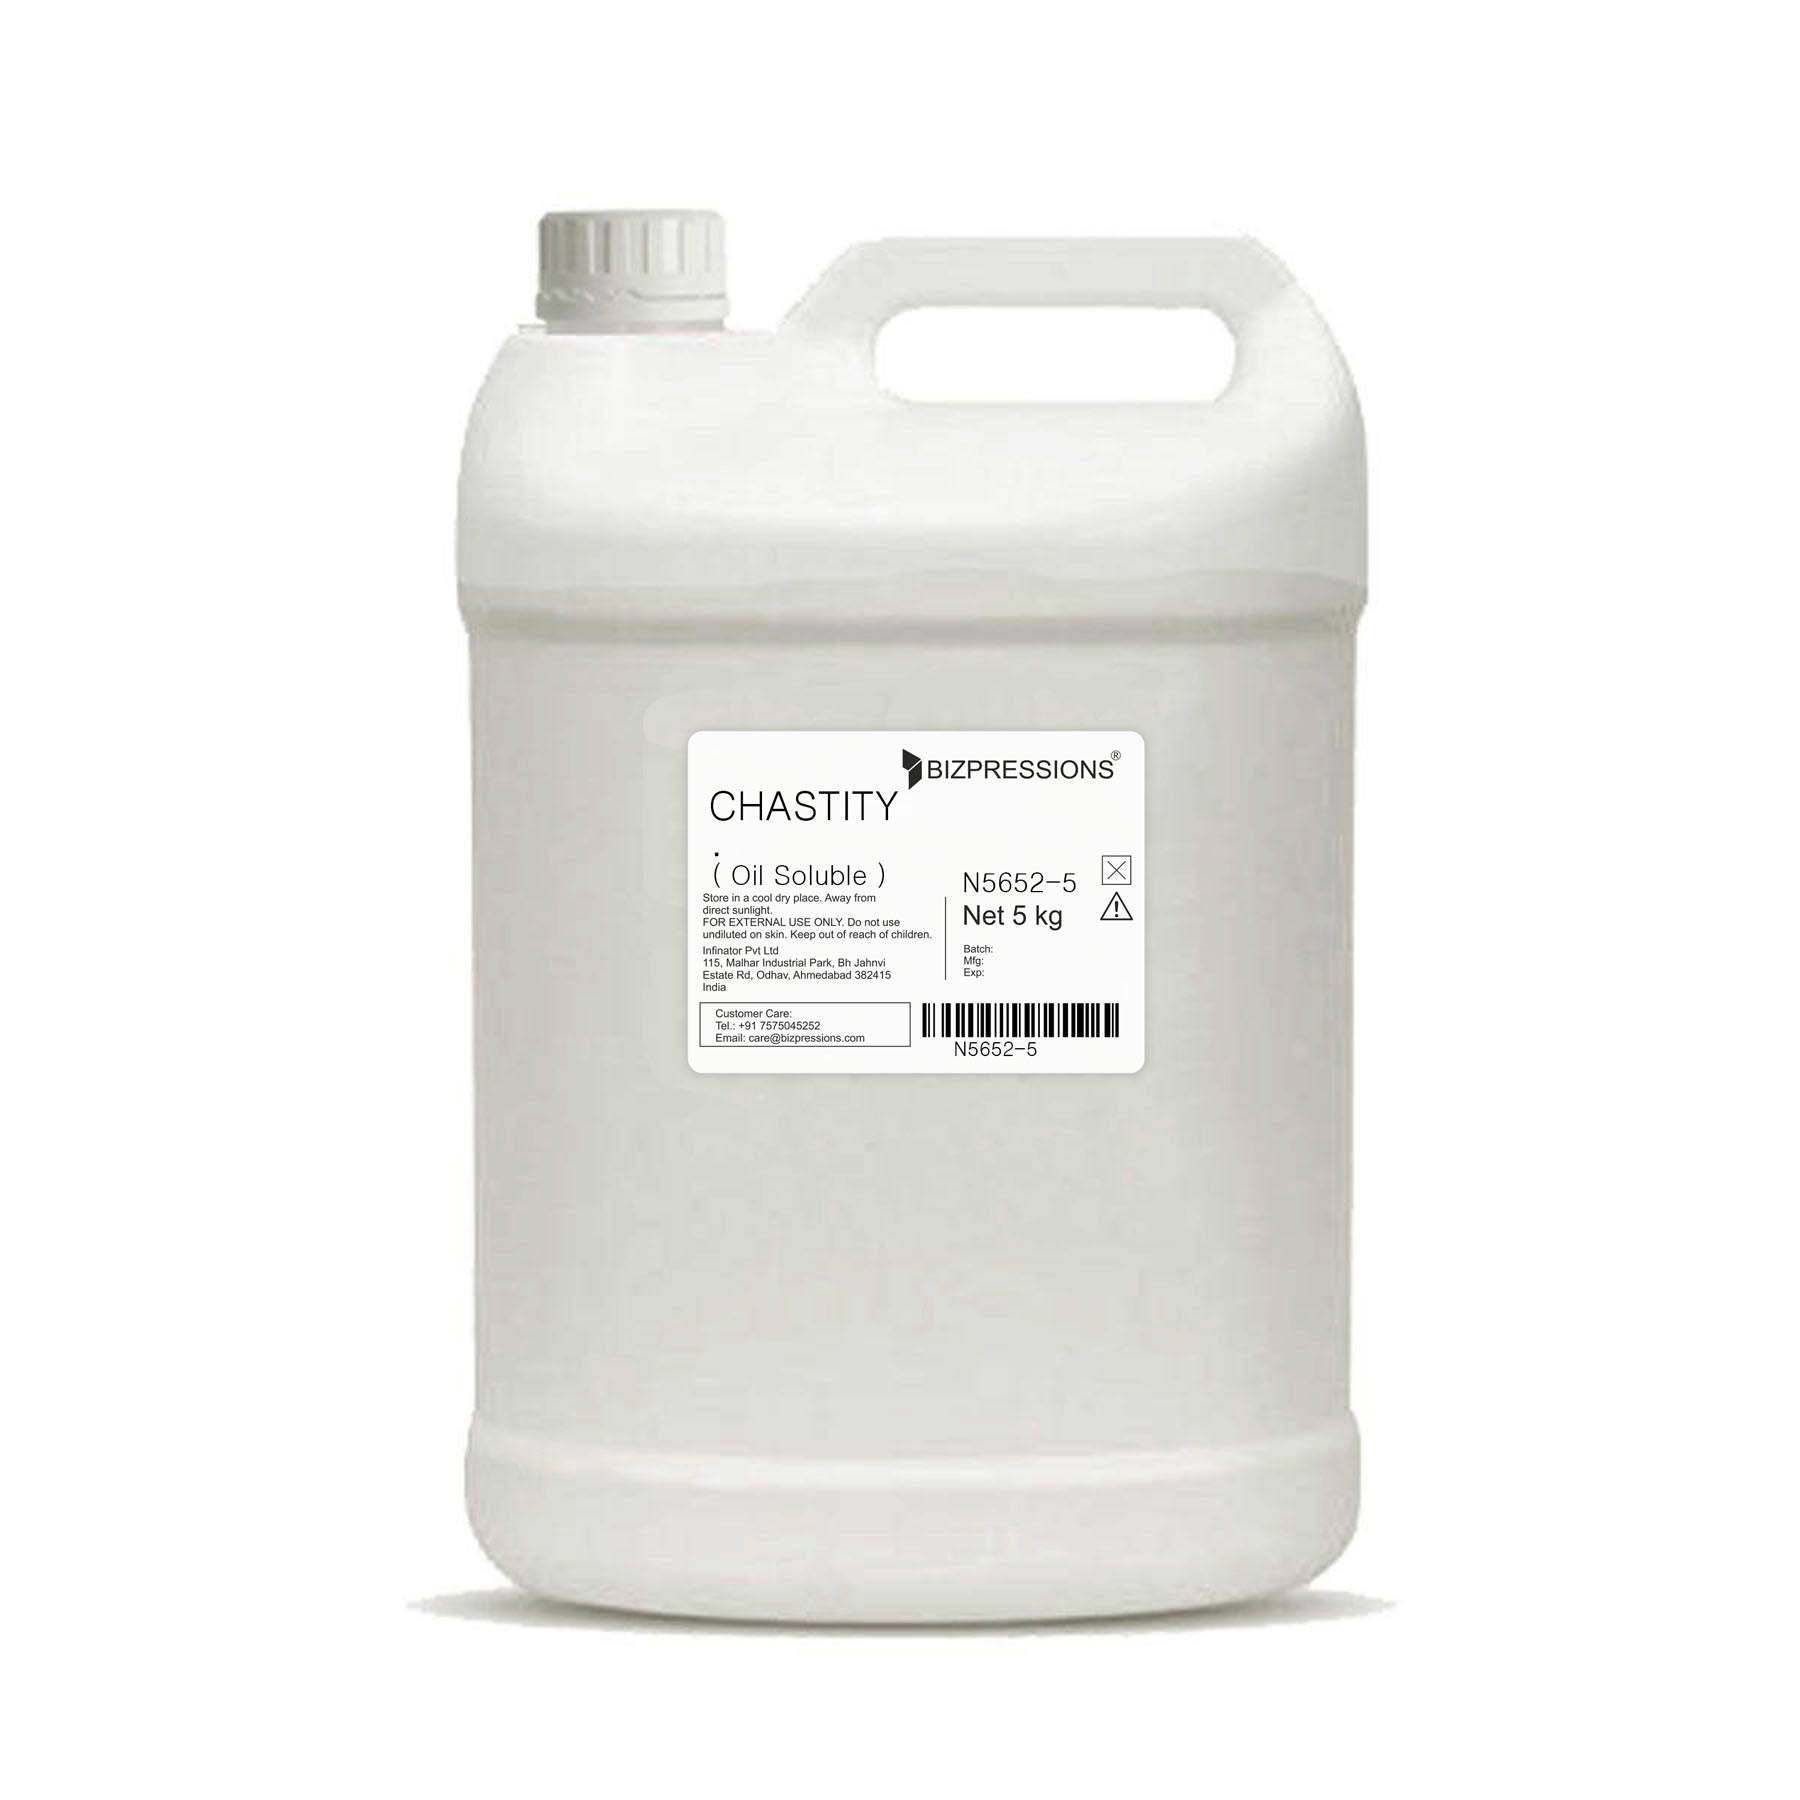 CHASTITY - Fragrance ( Oil Soluble ) - 5 kg